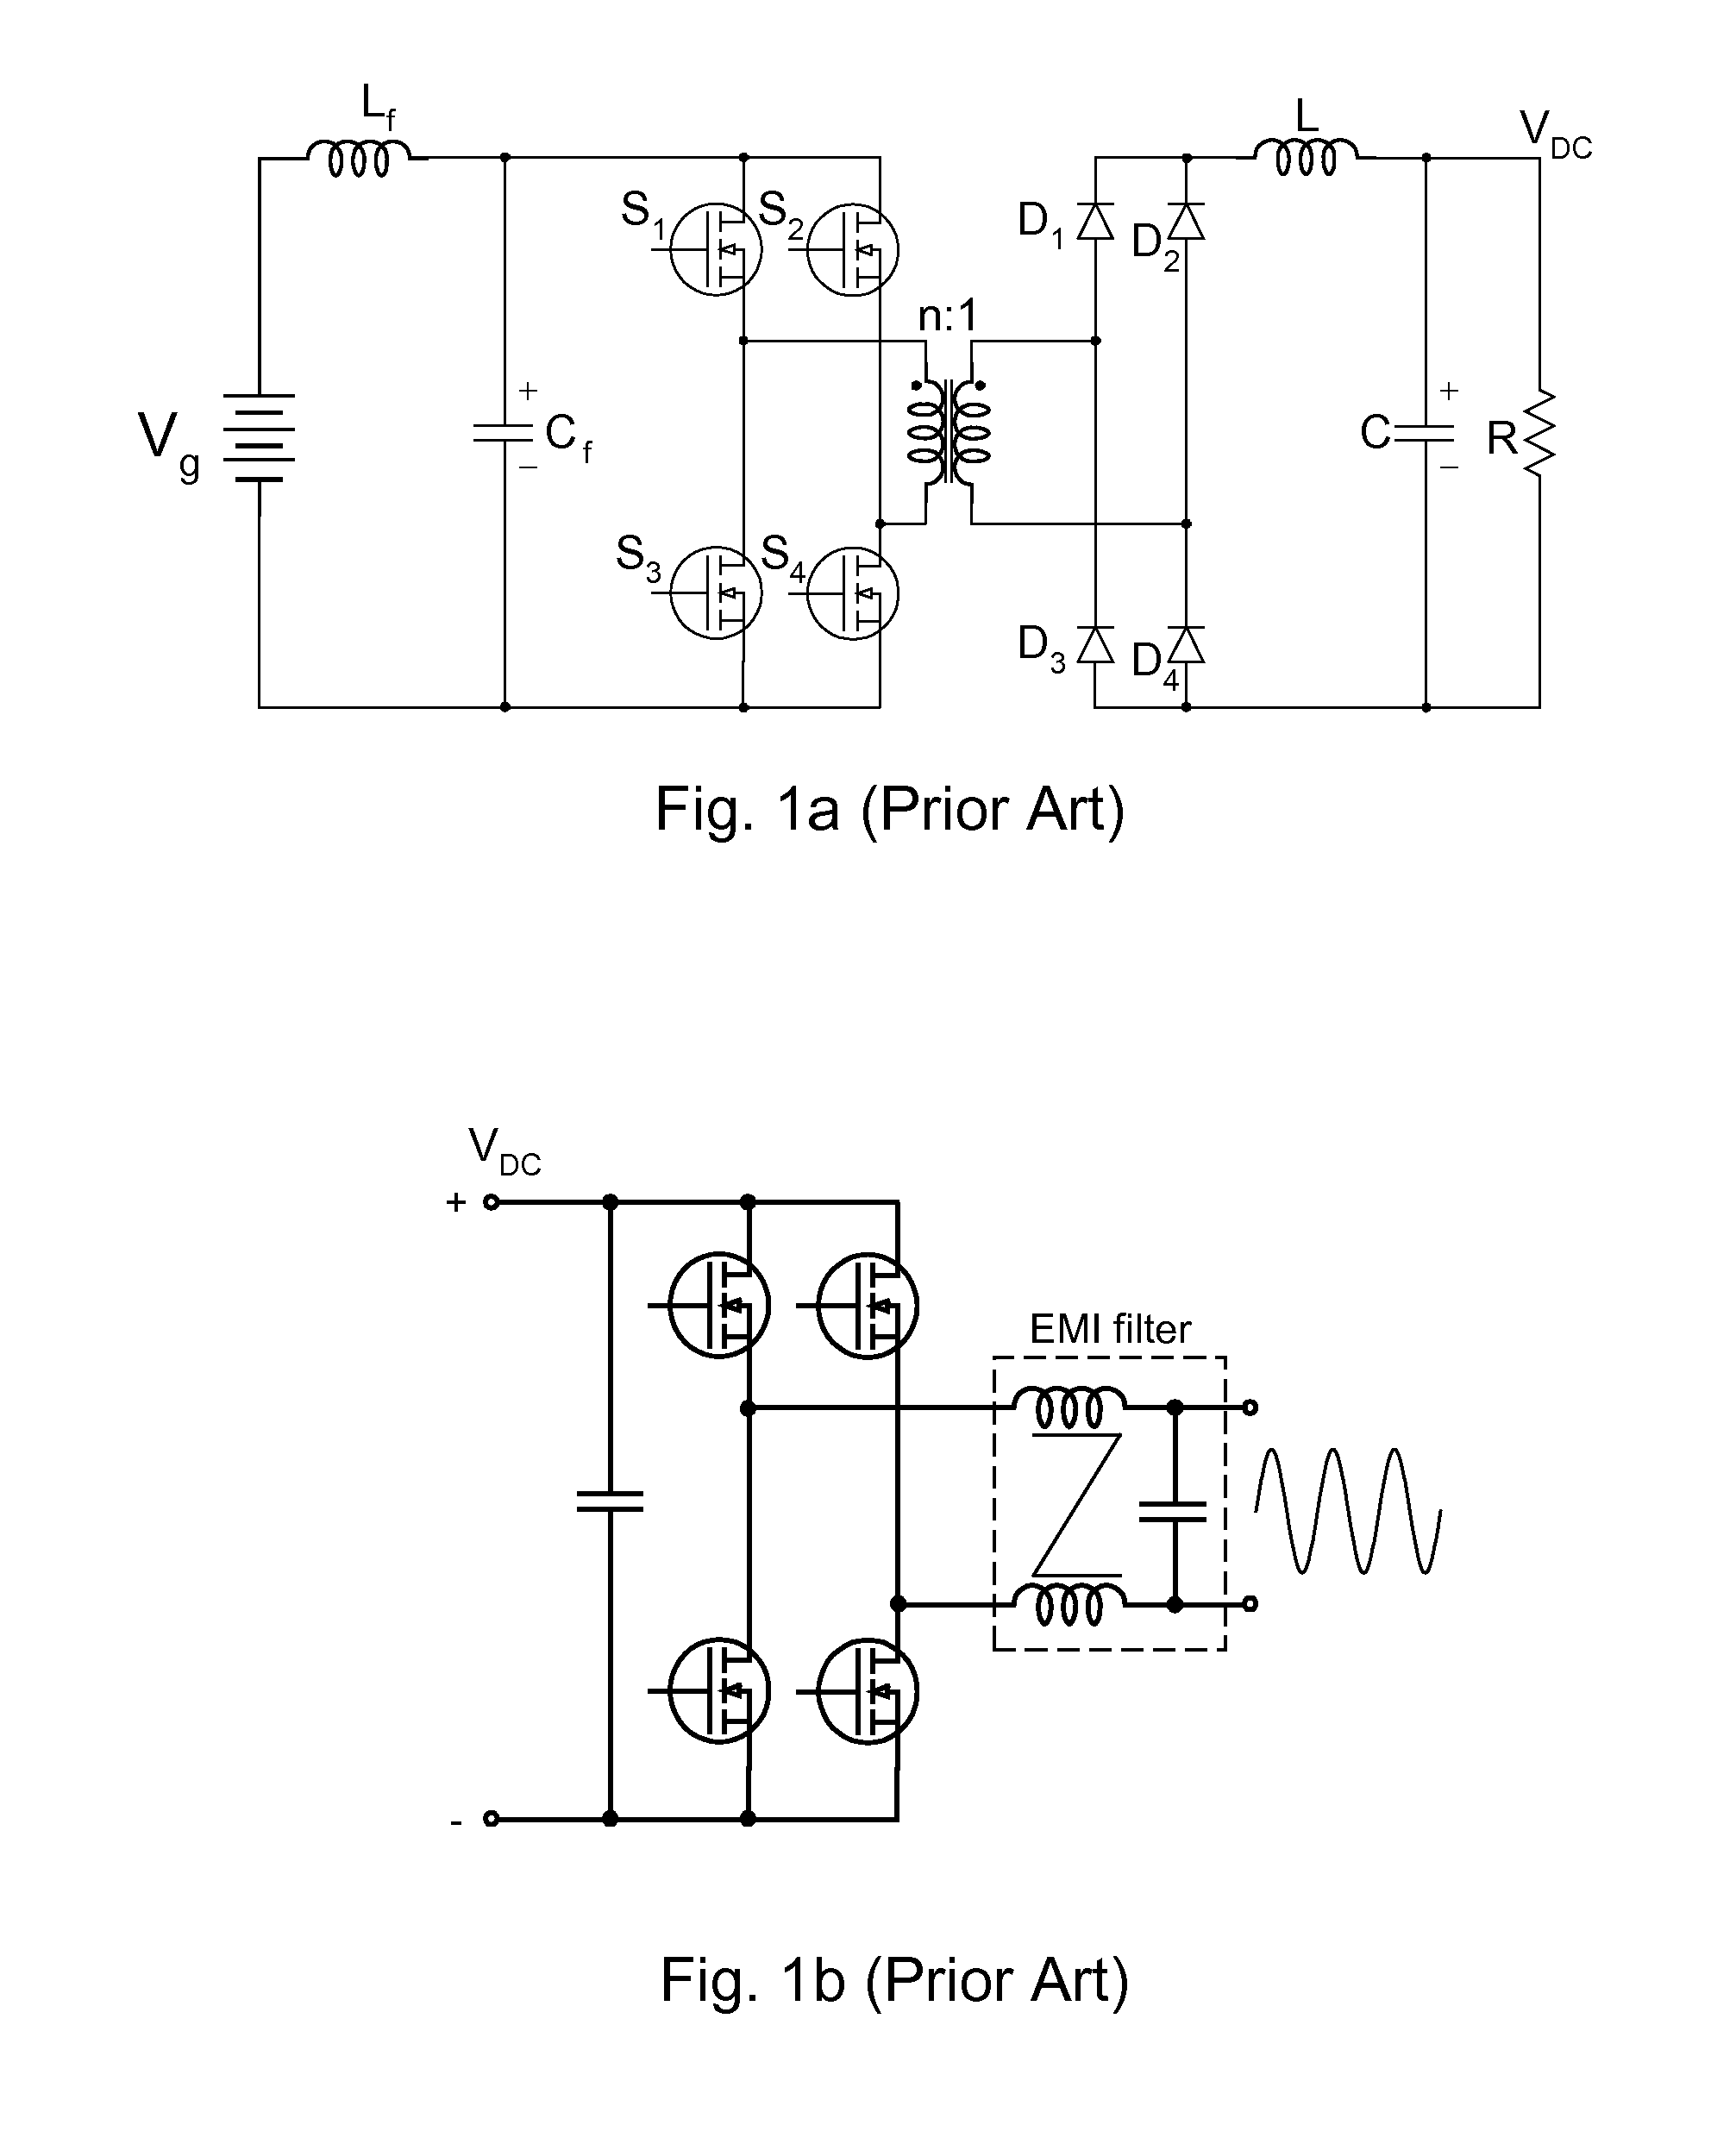 Single-stage inverter with high frequency isolation transformer